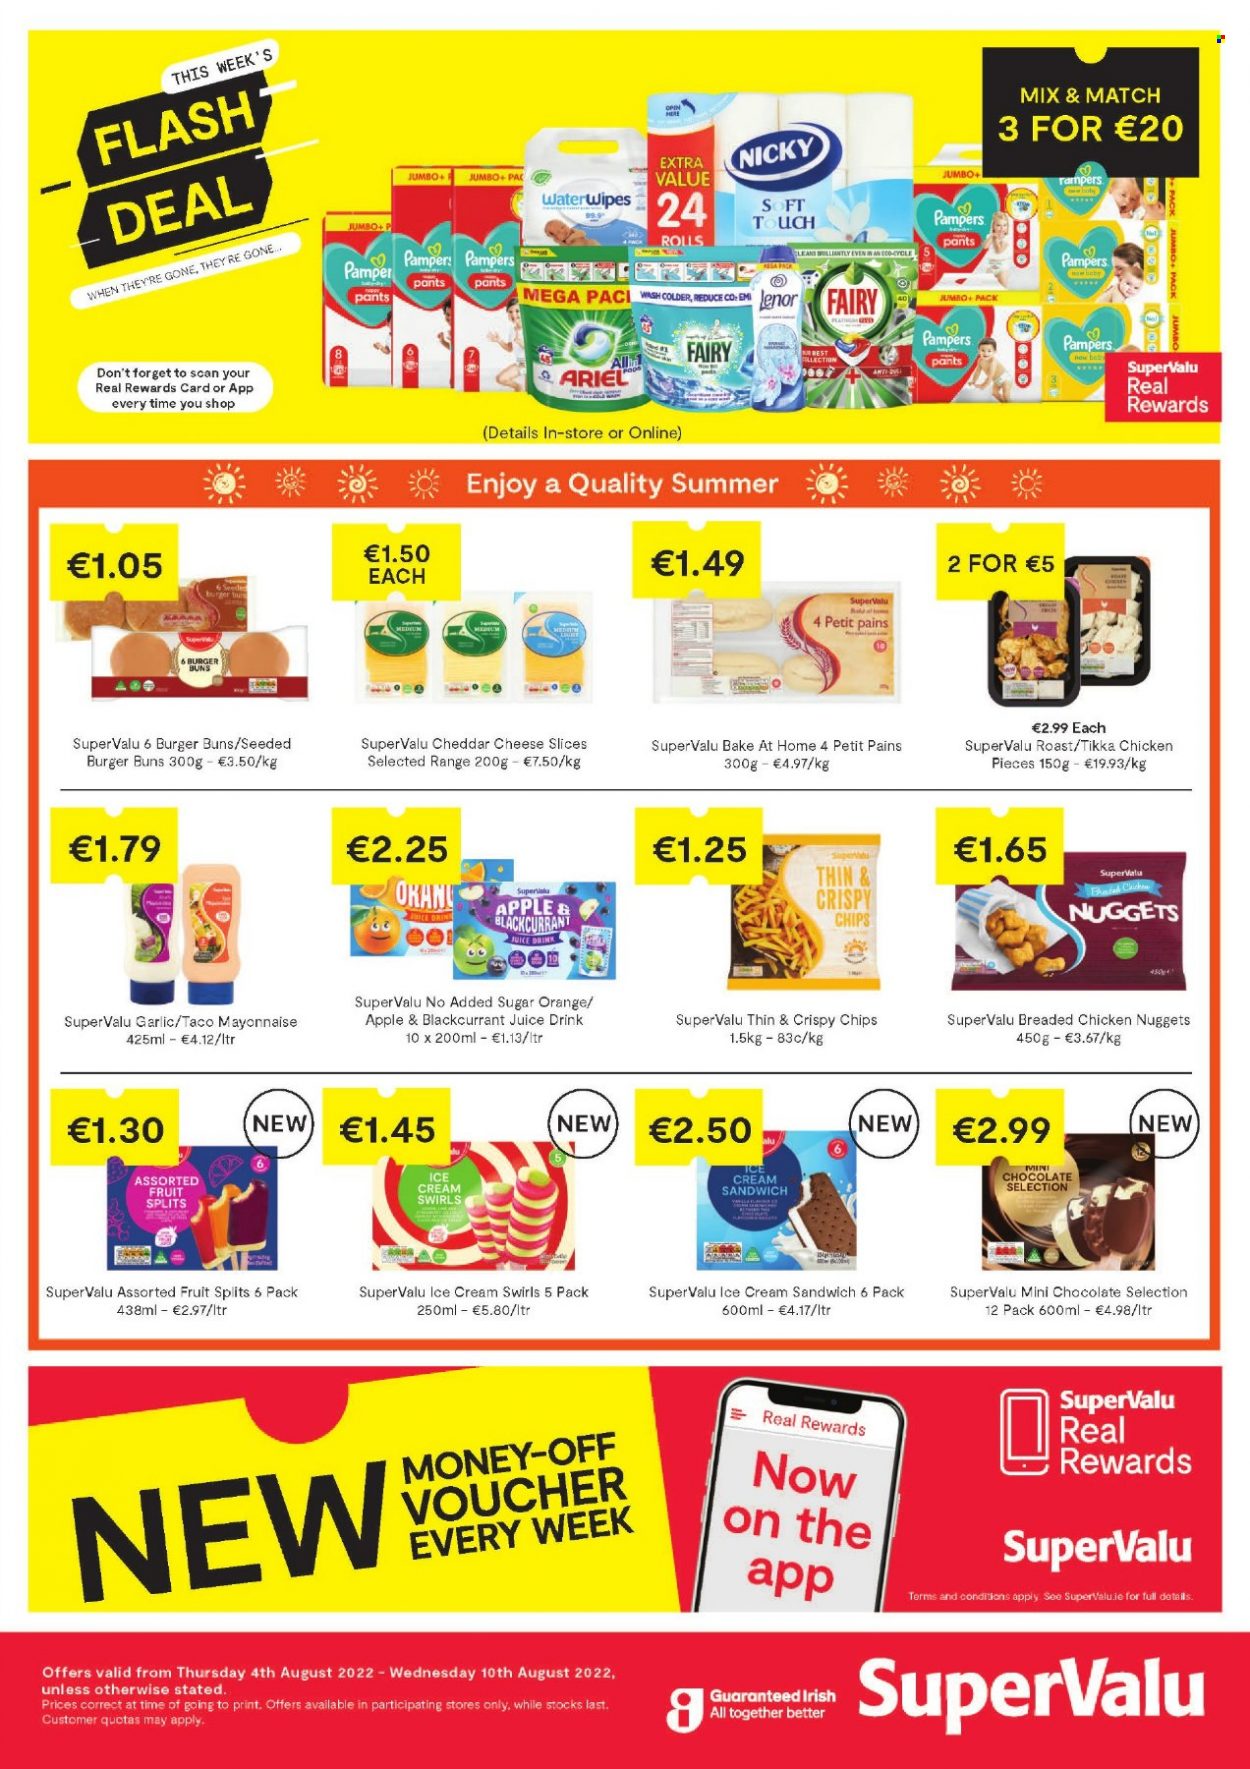 thumbnail - SuperValu offer  - 04.08.2022 - 10.08.2022 - Sales products - buns, burger buns, garlic, oranges, nuggets, fried chicken, chicken nuggets, sliced cheese, cheese, shake, mayonnaise, ice cream, ice cream sandwich, chips, juice, Pampers, pants, Fairy, Ariel, Lenor, Pamper. Page 1.